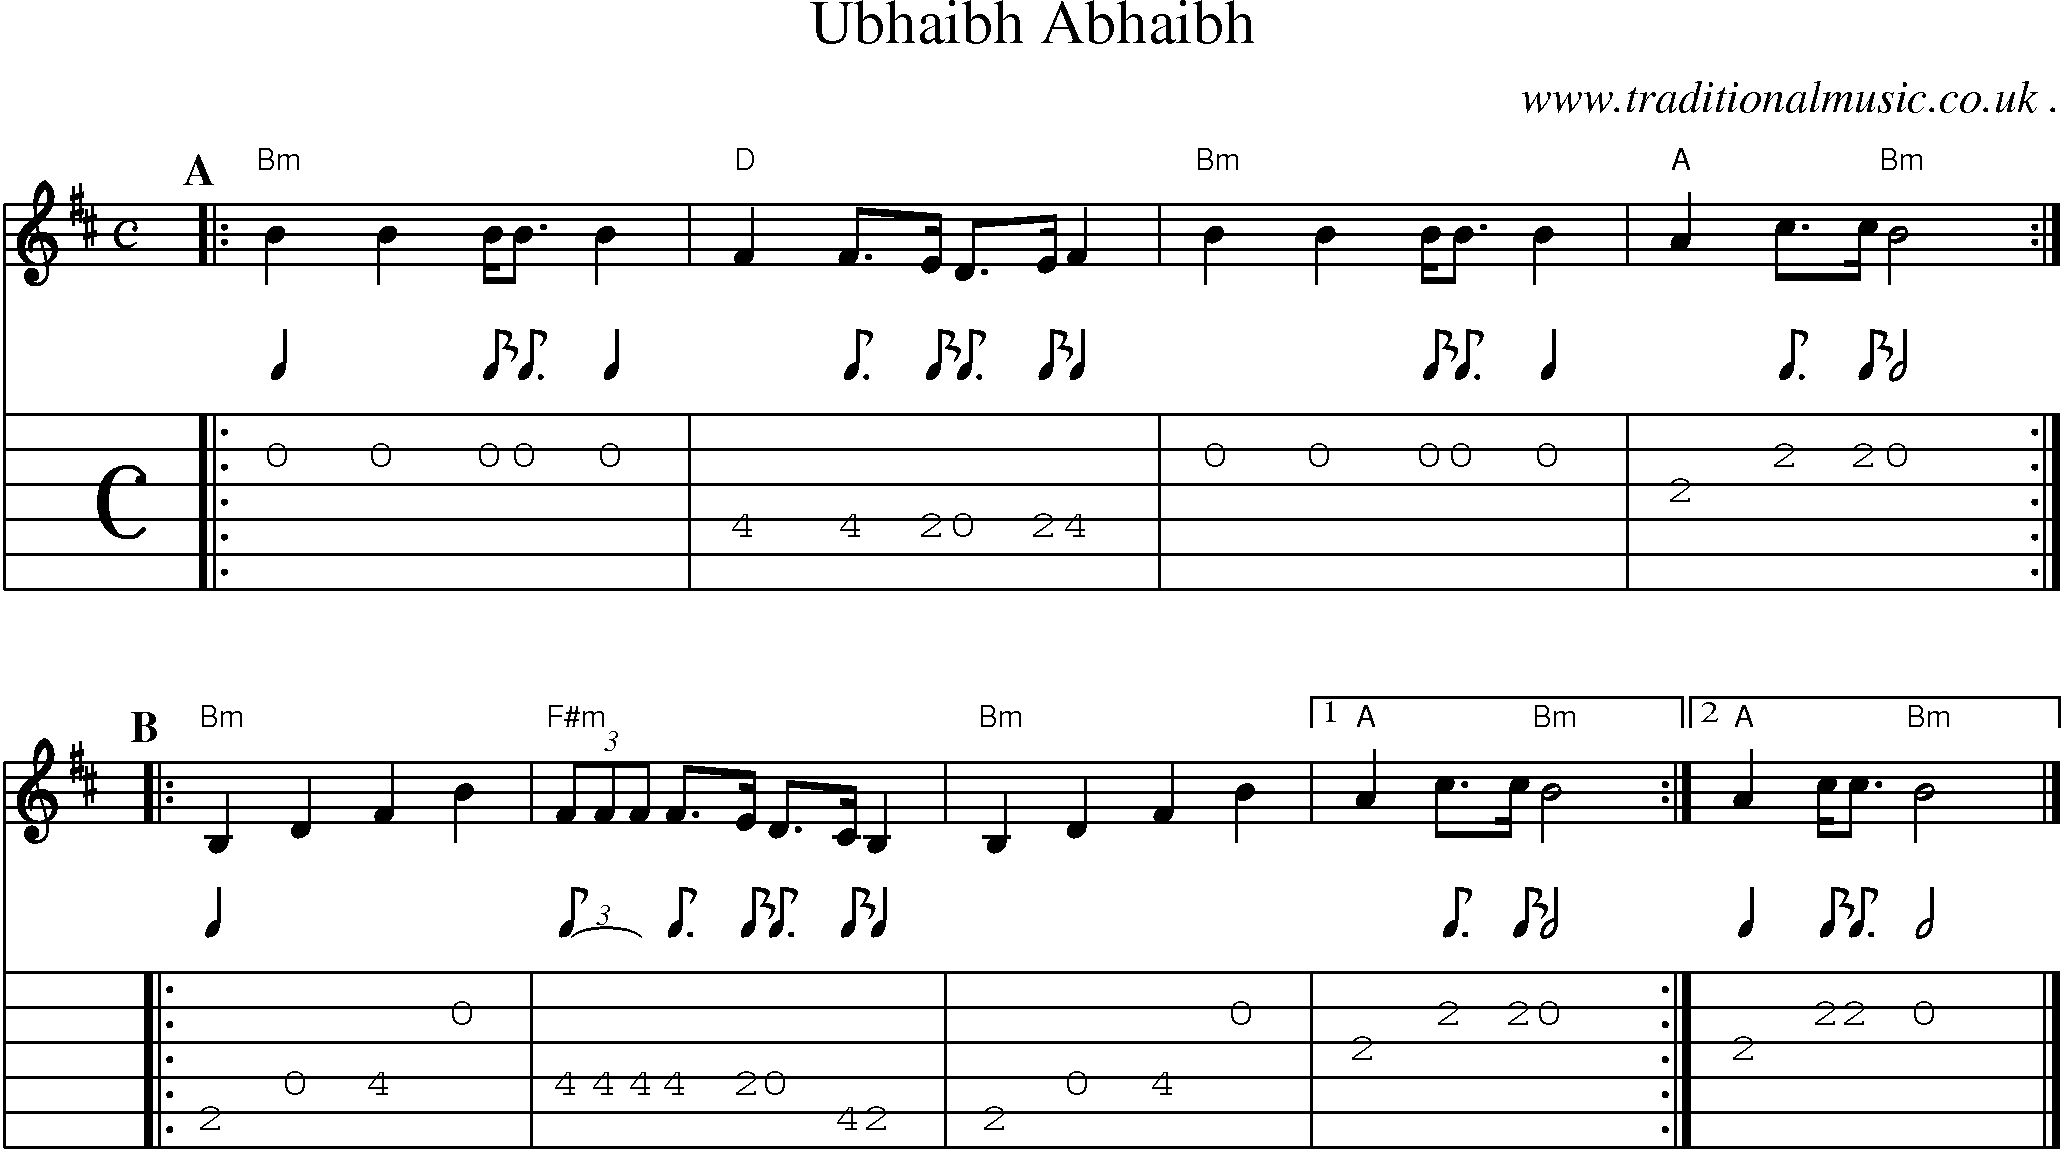 Sheet-music  score, Chords and Guitar Tabs for Ubhaibh Abhaibh